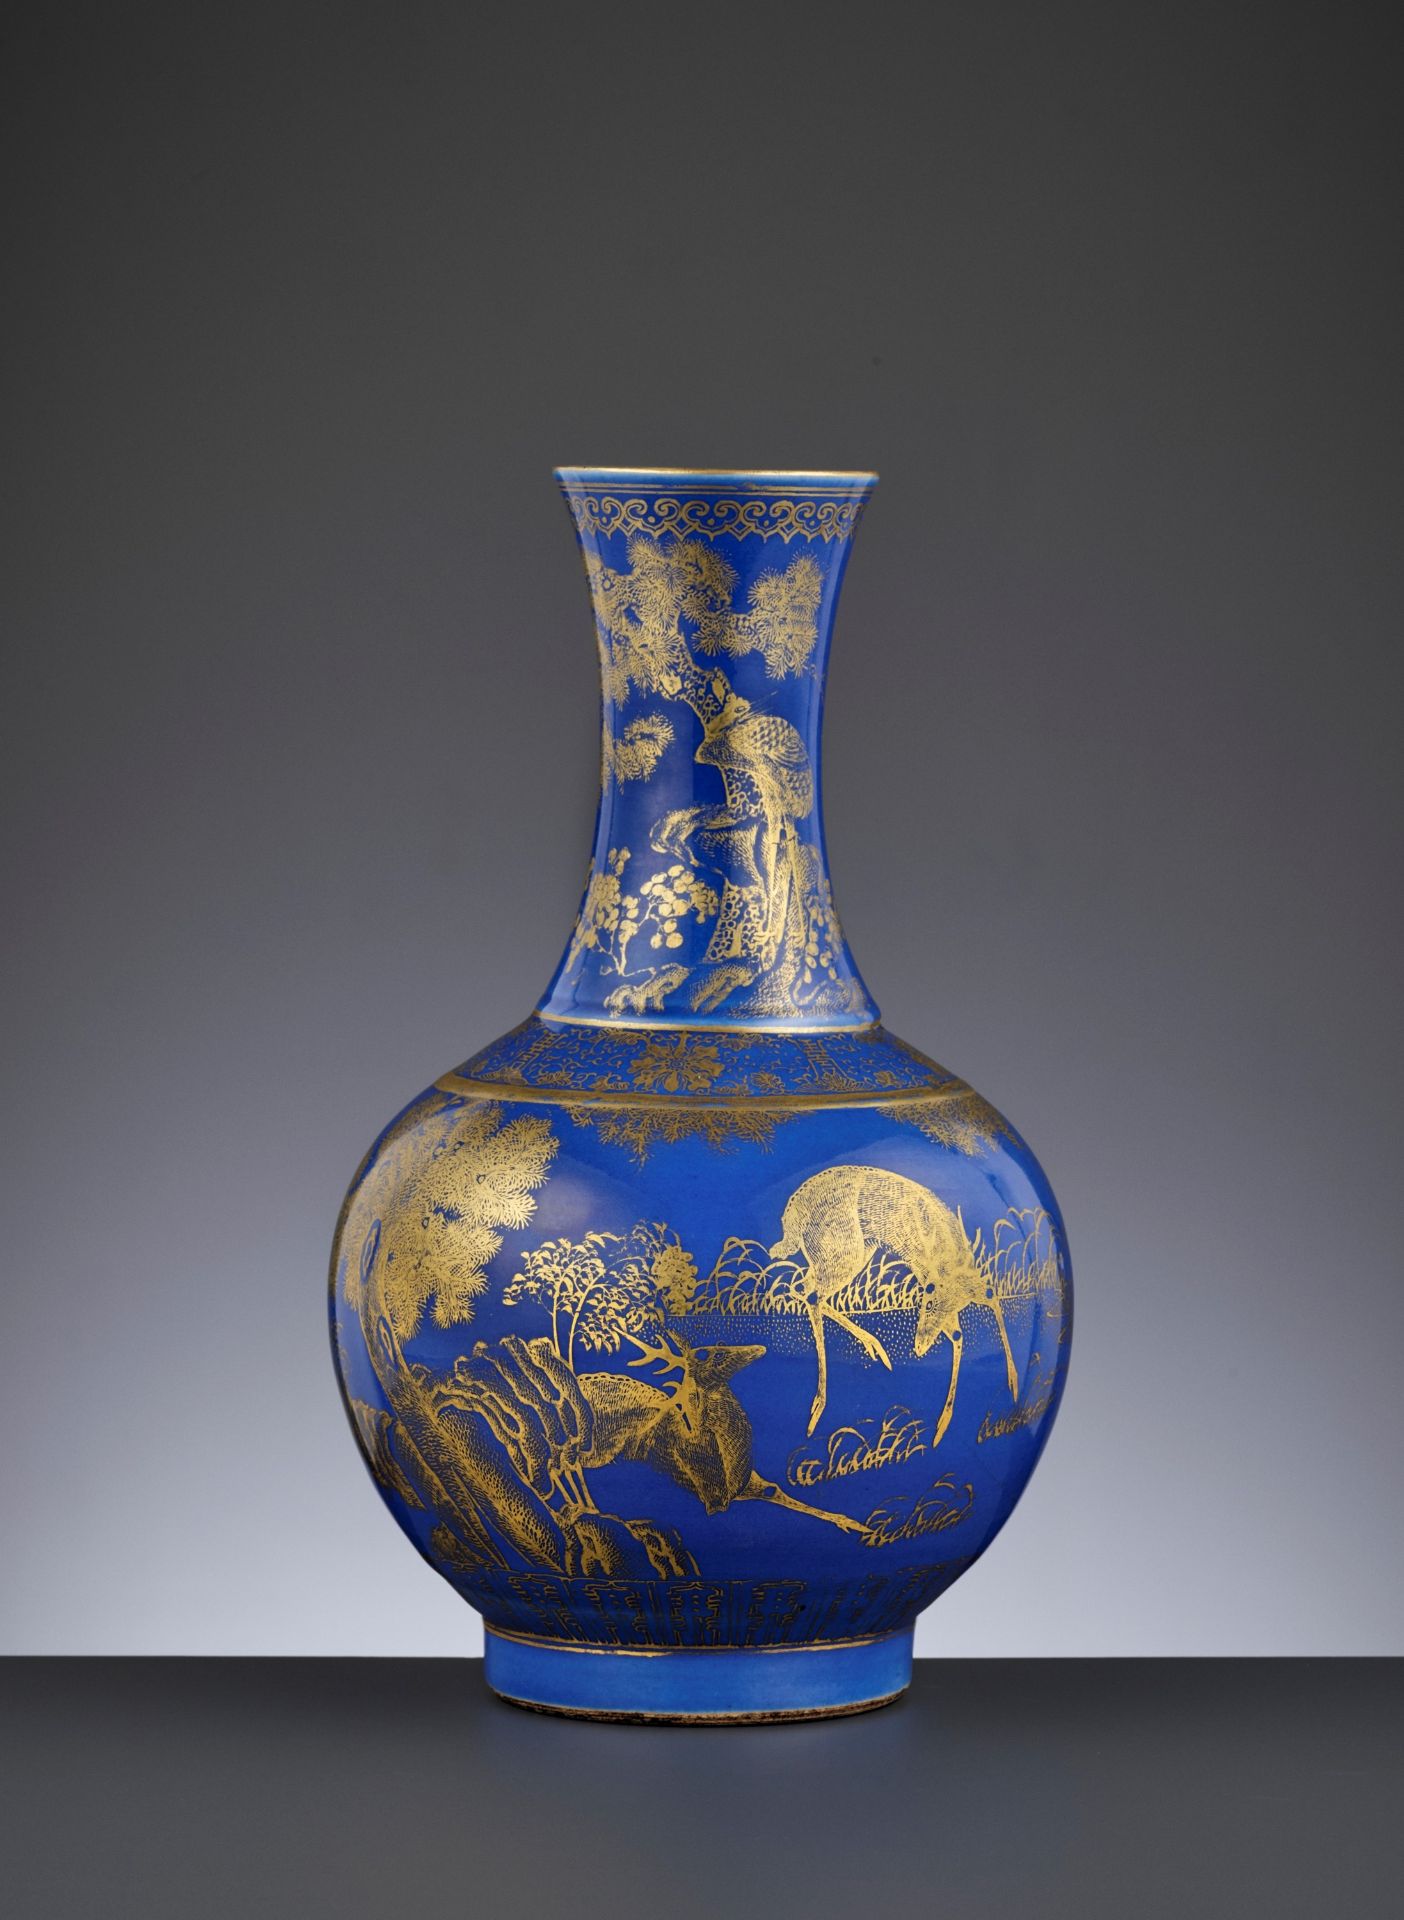 A POWDER-BLUE-GROUND GILT-DECORATED 'DEER AND CRANE' BOTTLE VASE, GUANGXU MARK AND PERIOD